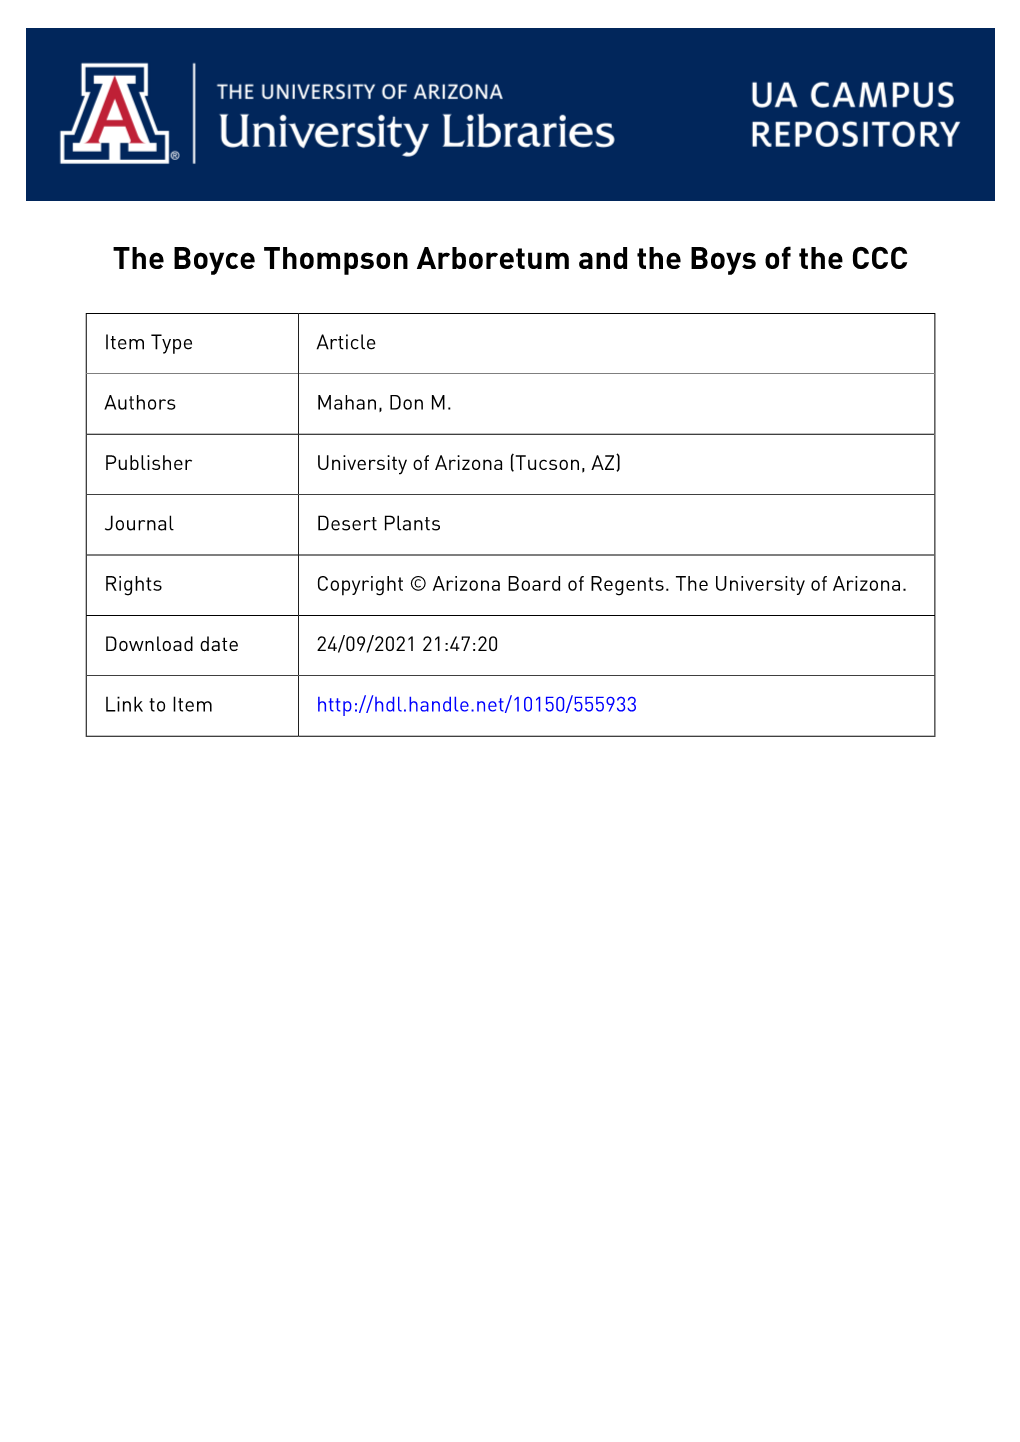 The Boyce Thompson Arboretum and the Boys of the CCC